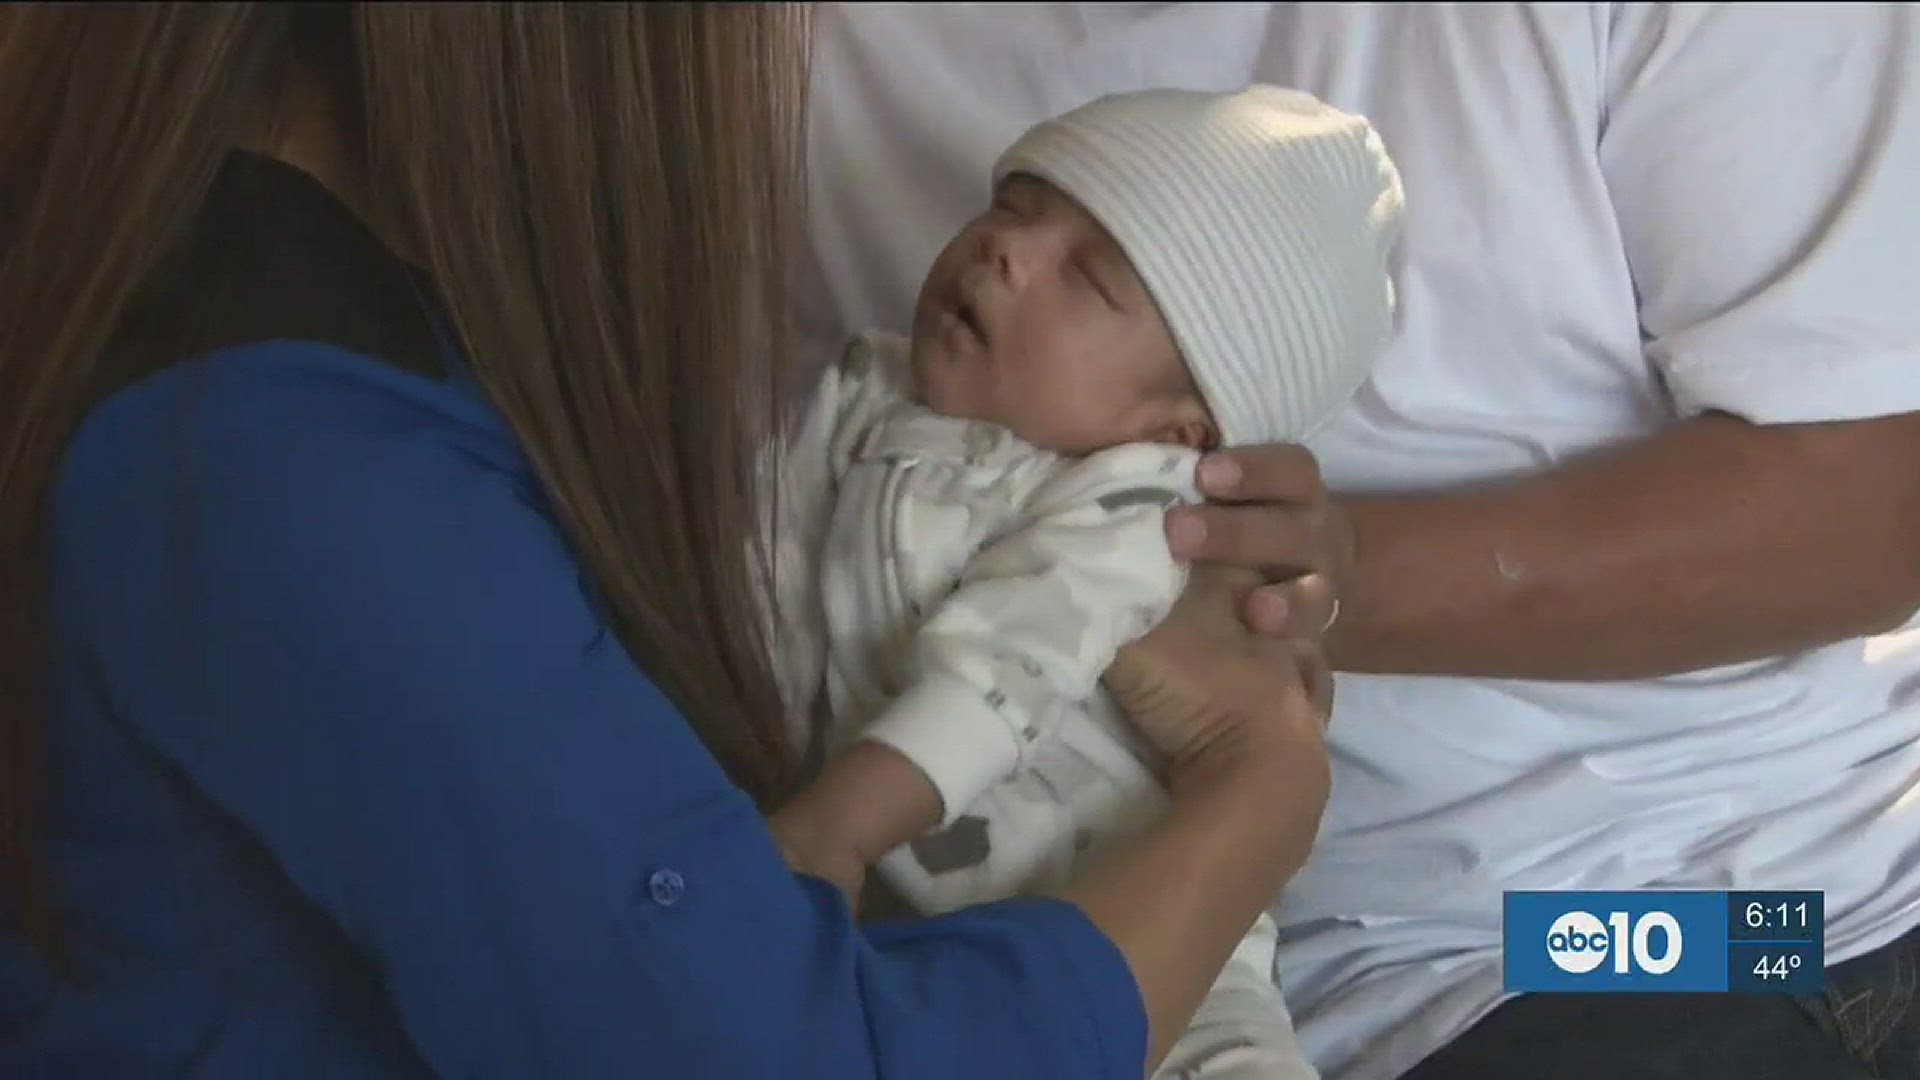 A recent cutting-edge operation that took place at the UC Davis Children's Hospital helped bring a healthy baby boy into the world. (Dec. 7, 2016)